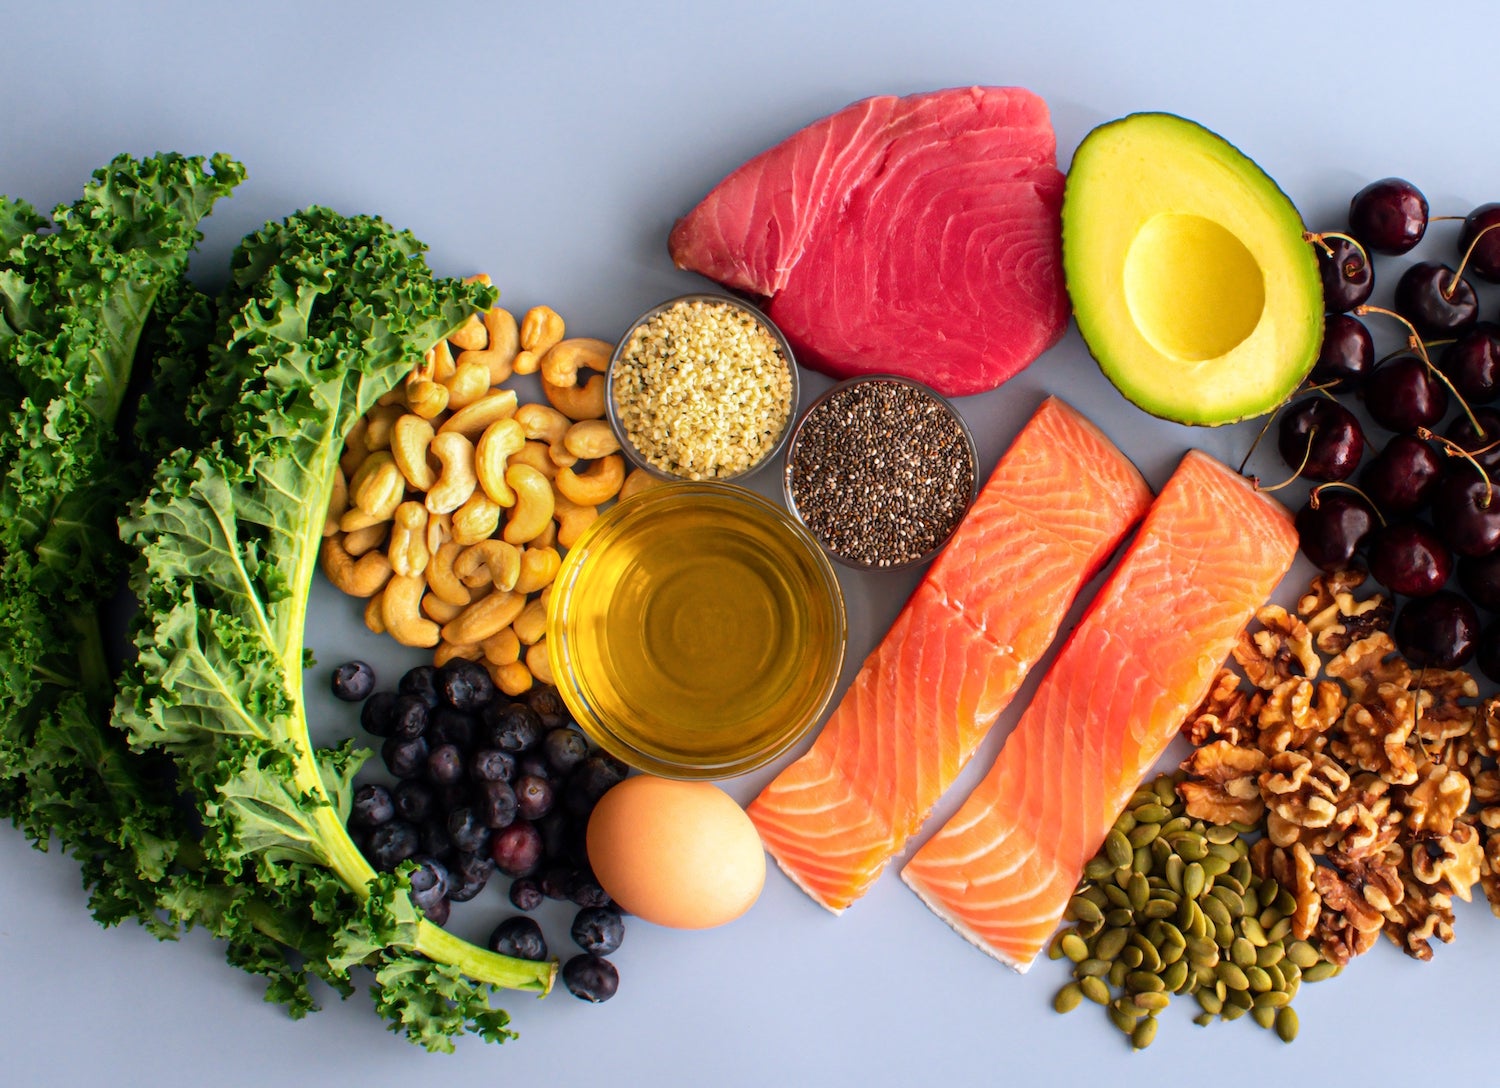 Overhead View of Fresh Omega-3 Rich Foods: A variety of healthy foods like fish, nuts, seeds, fruit, vegetables, and oil